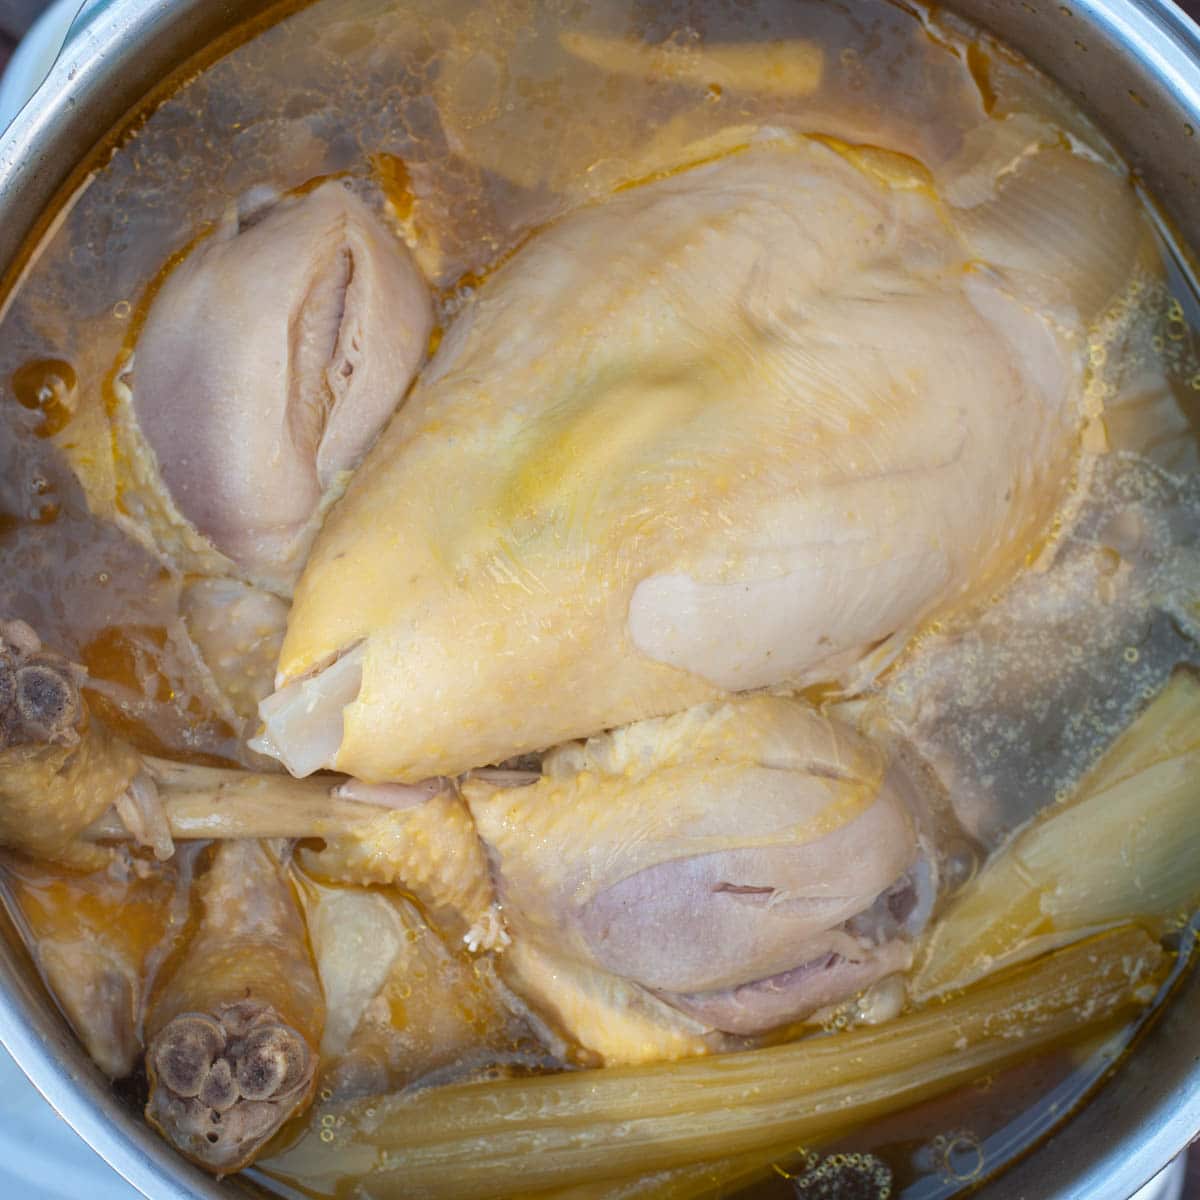 Reviving a Boiled Chicken